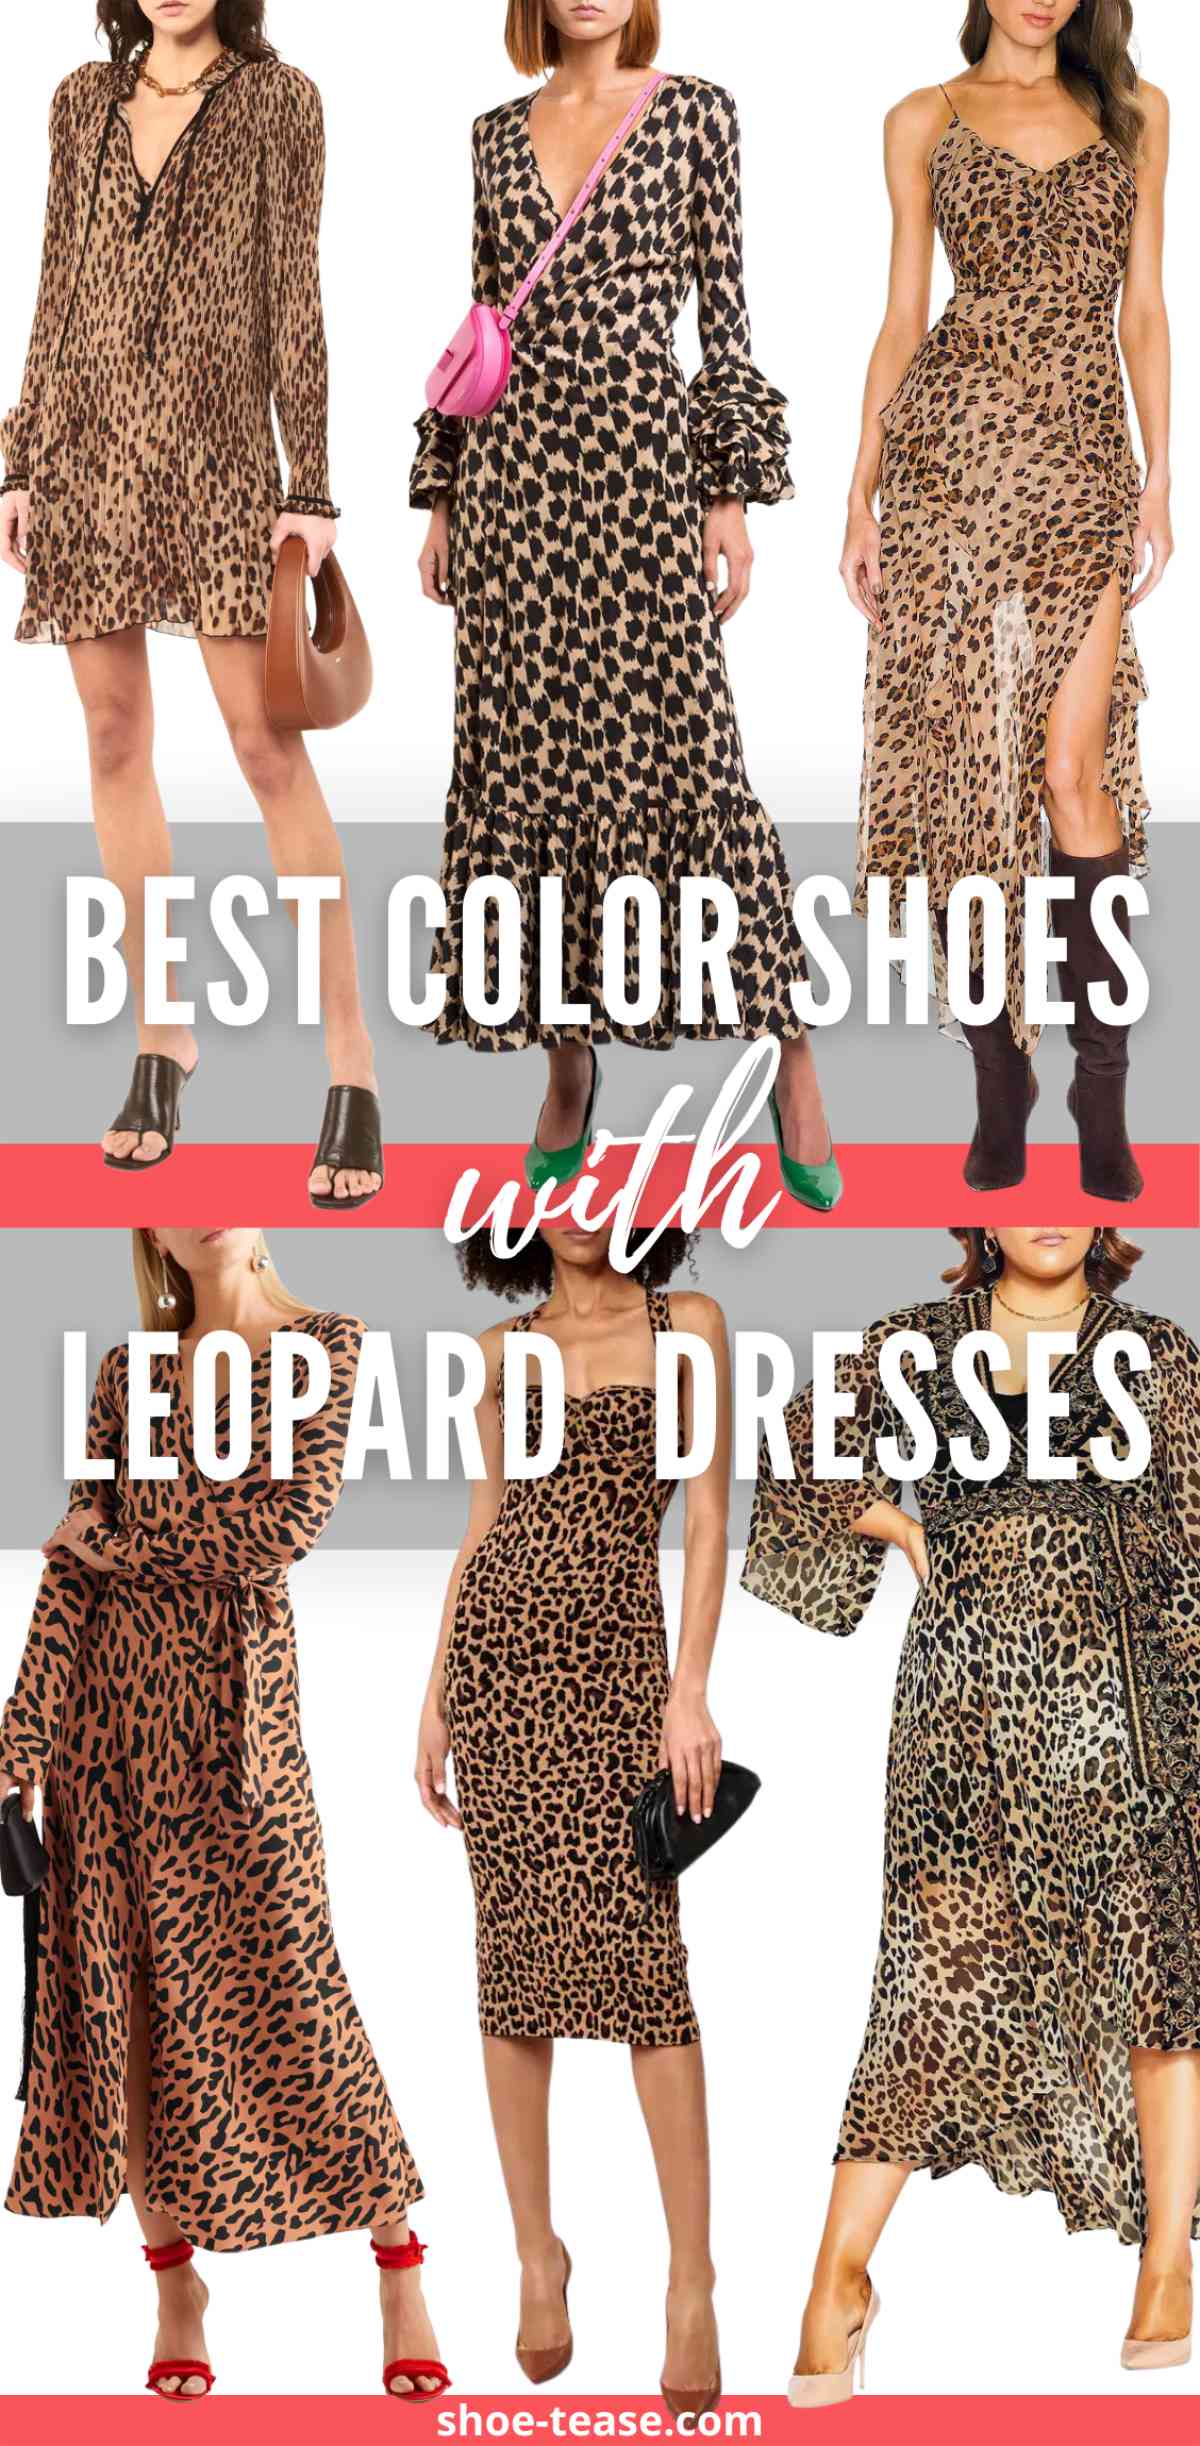 https://www.shoe-tease.com/wp-content/uploads/2022/03/What-color-shoes-to-wear-with-leopard-print-dress-outfits-PIN.png.jpg